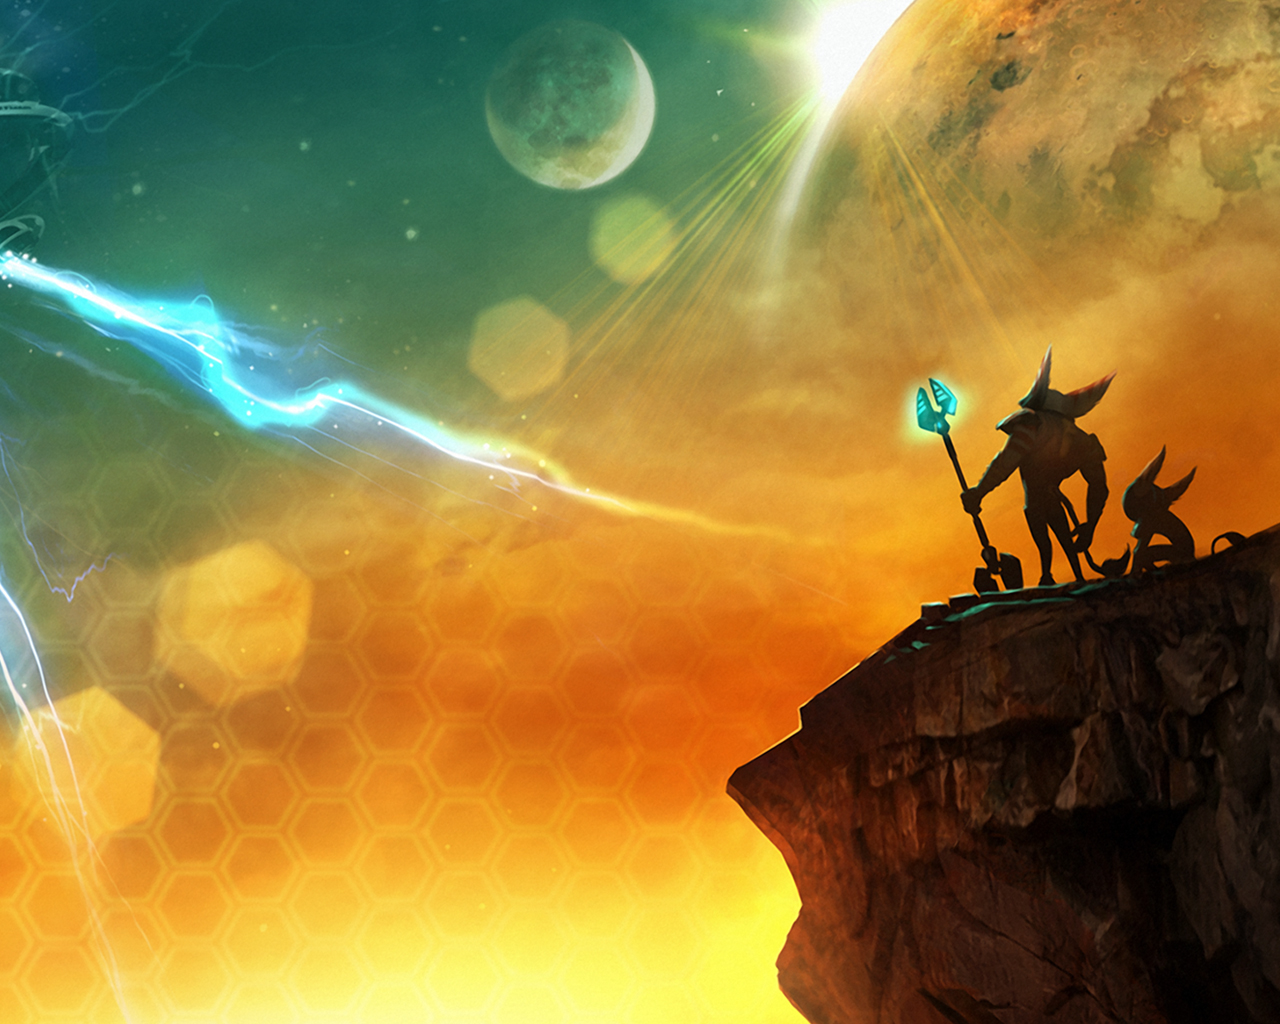 Ratchet & Clank Future: A Crack In Time HD wallpapers, Desktop wallpaper - most viewed